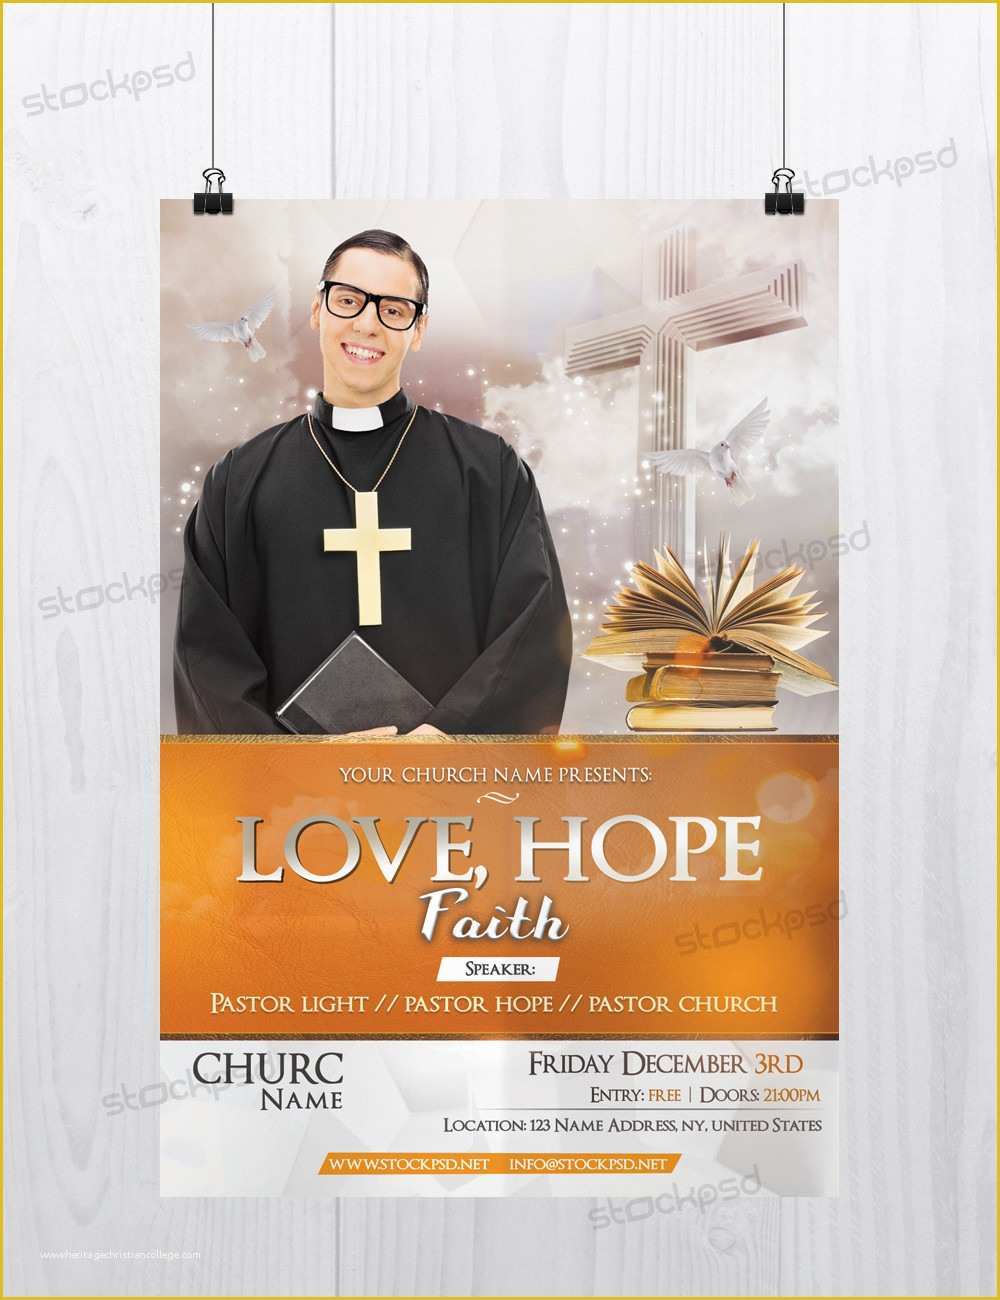 Free Church Flyer Templates Of Stockpsd – Free Psd Flyers Brochures and More